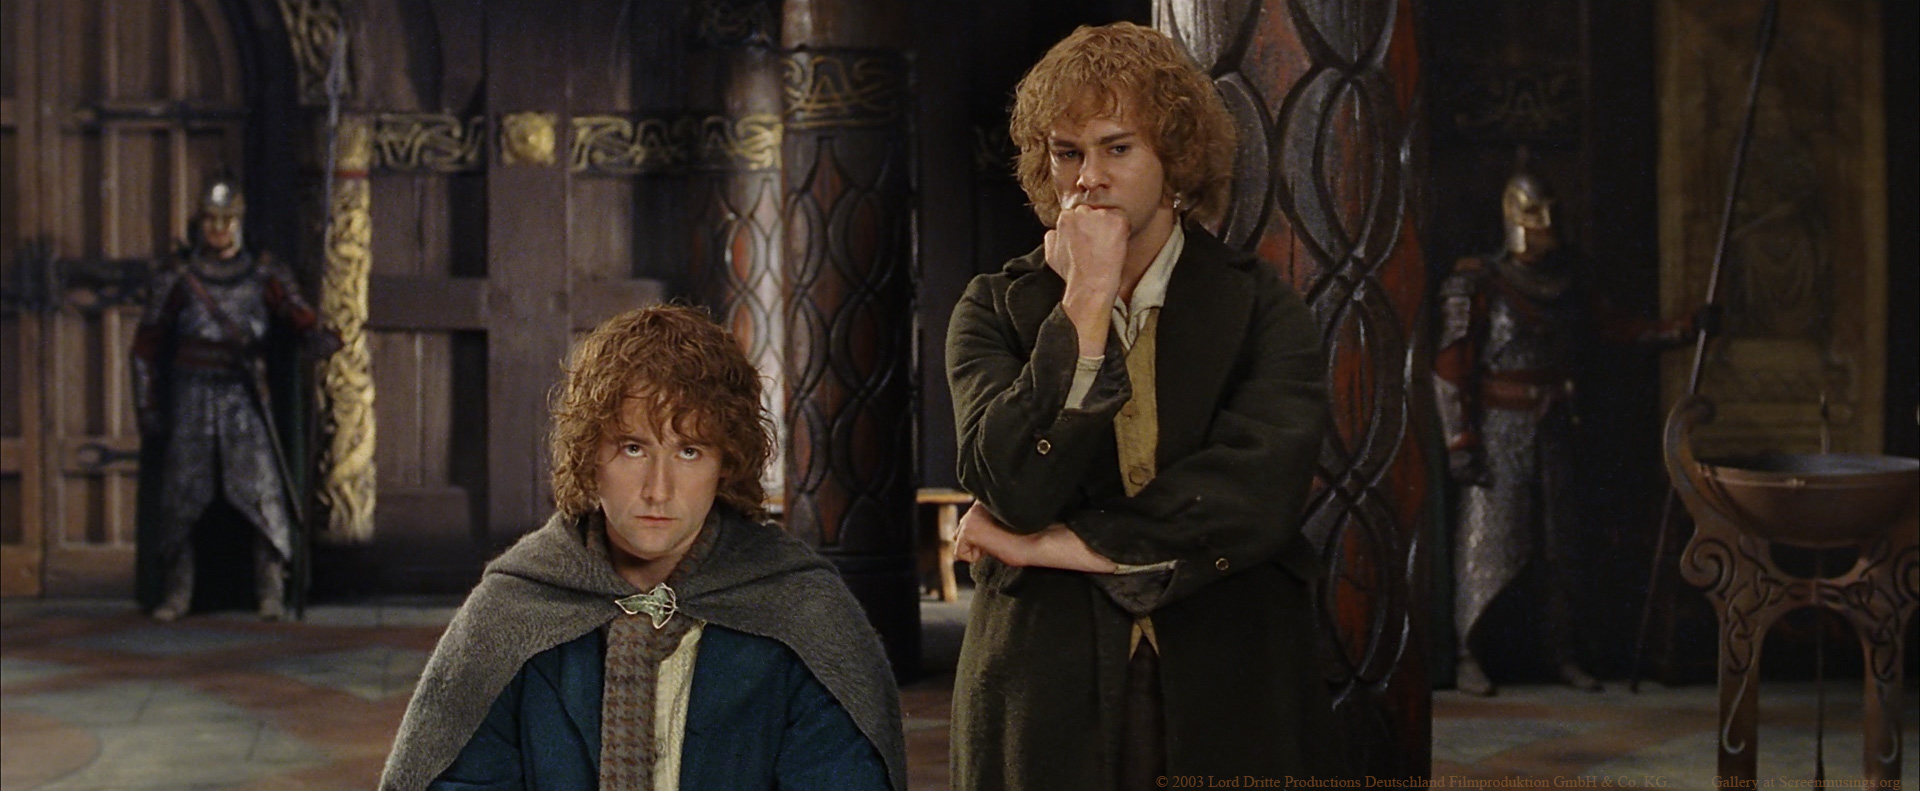 Billy Boyd in The Lord of the Rings: The Return of the King